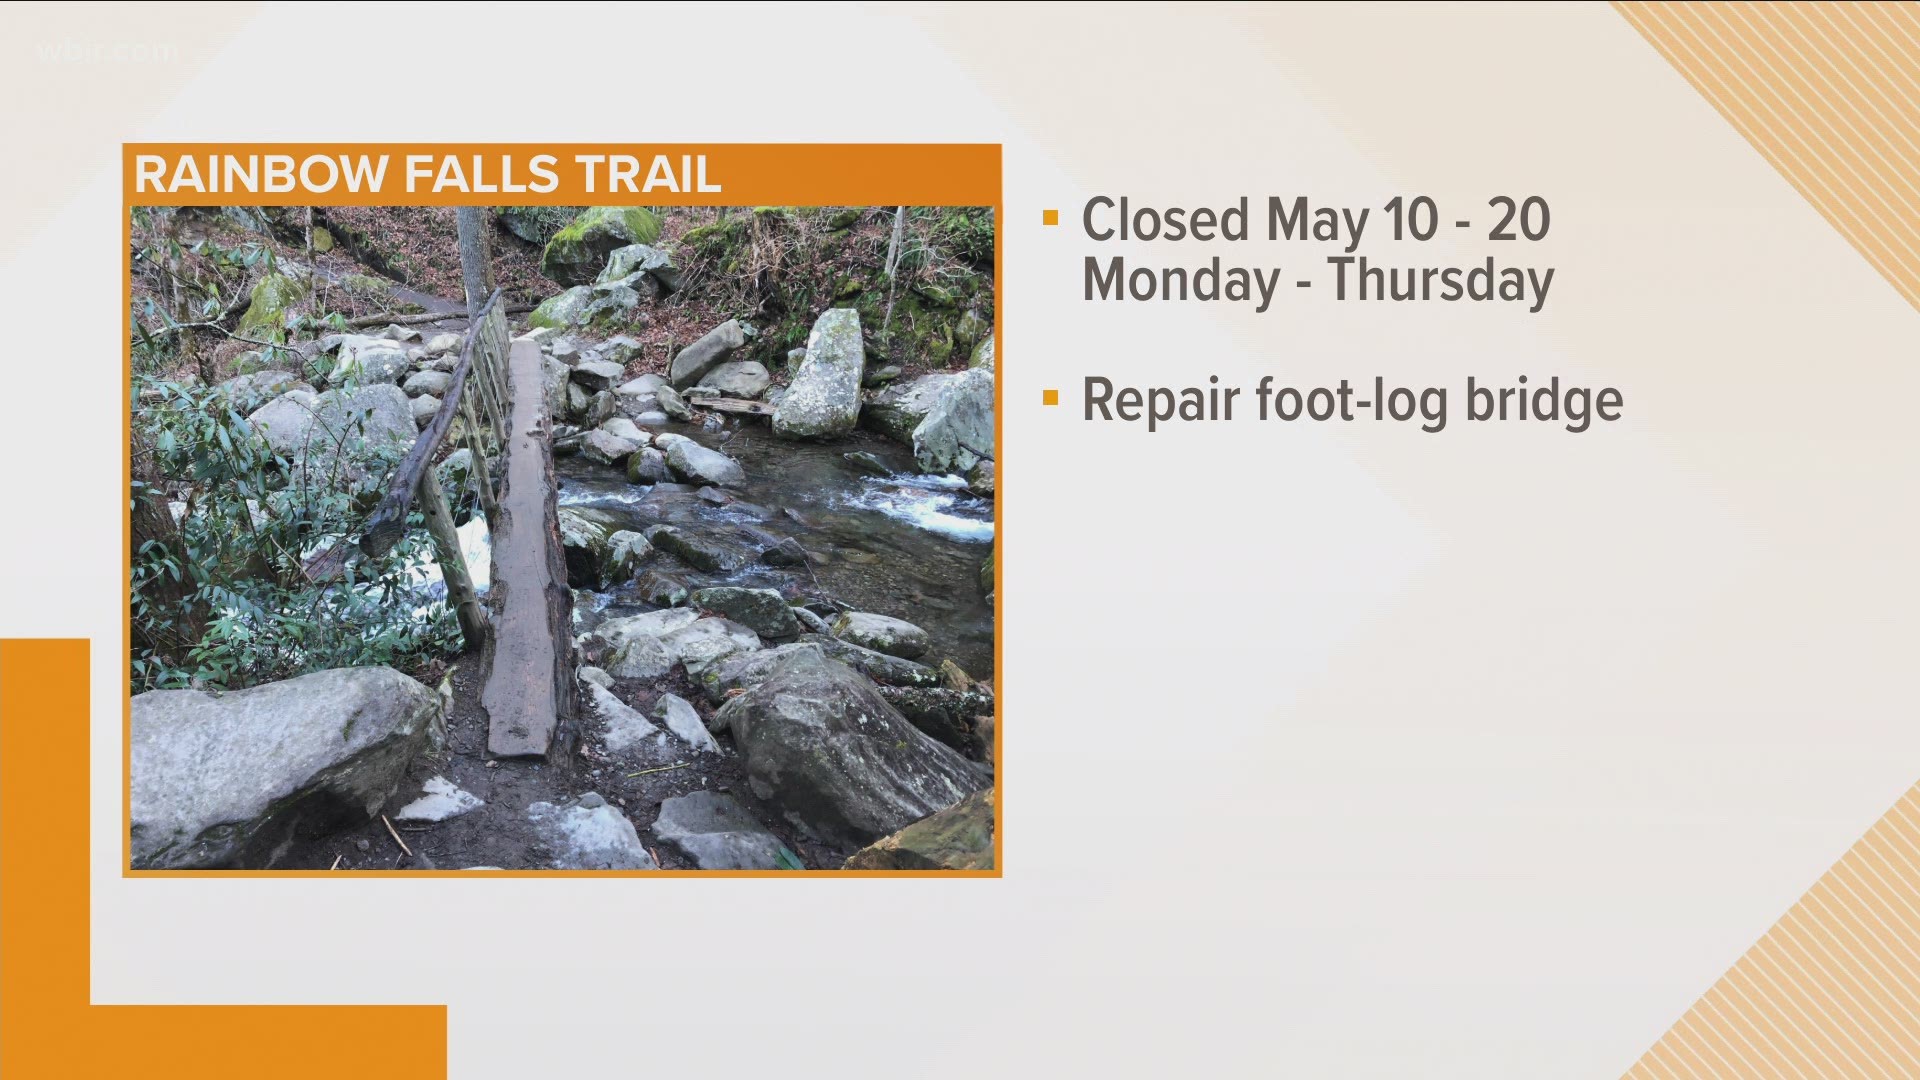 The area will be closed weekly on Monday through Thursday from May 10 through May 20. The trail will be fully open each week on Friday, Saturday, and Sunday